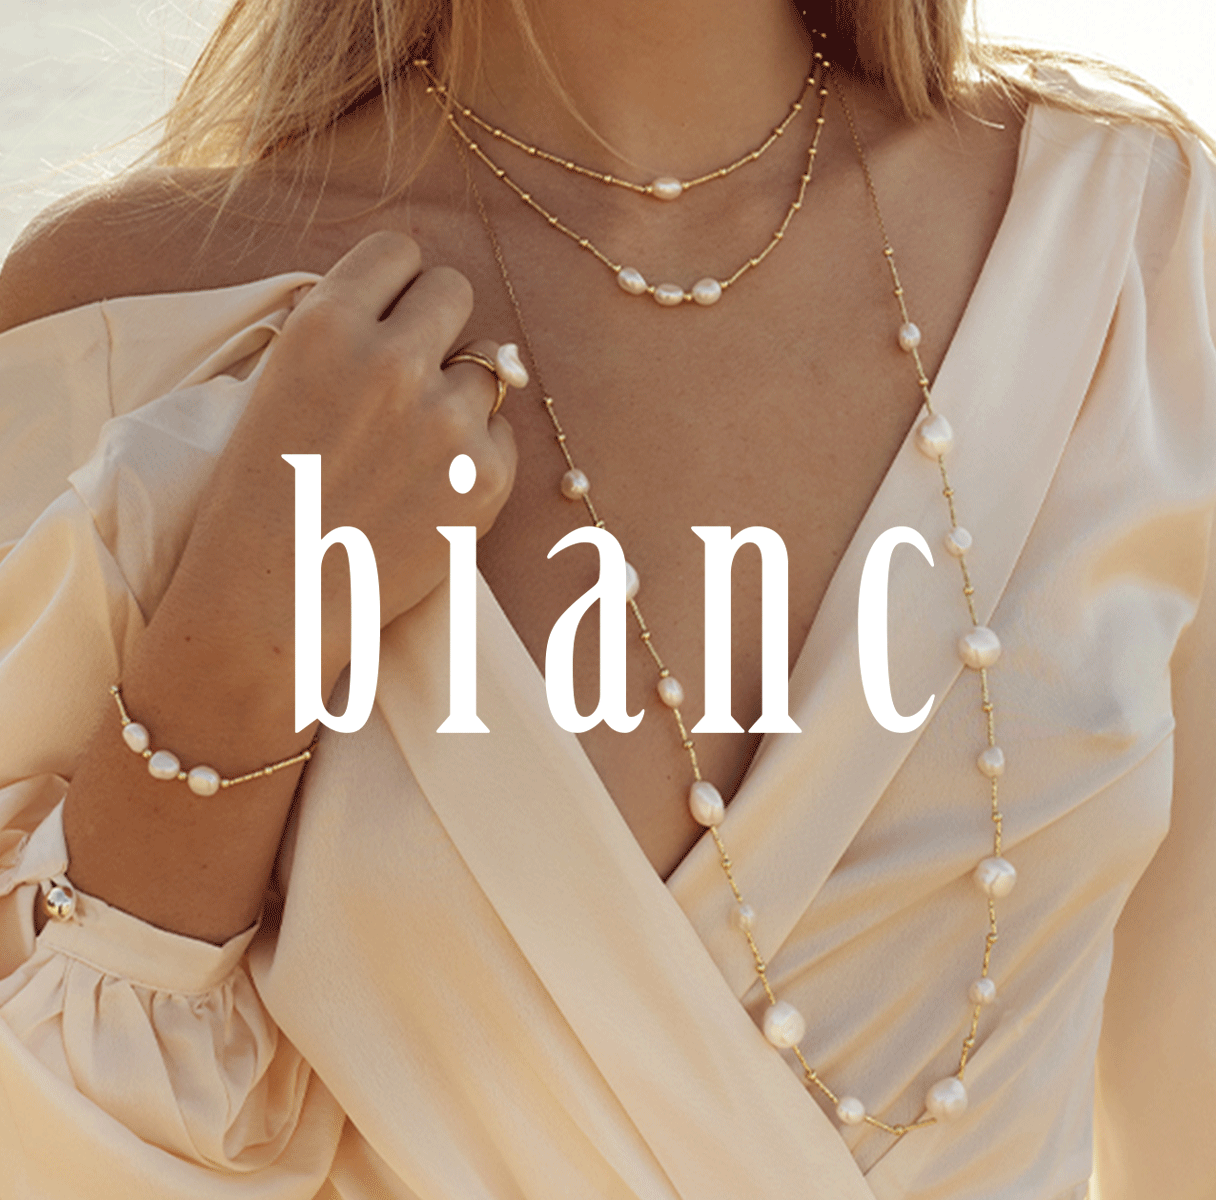 Bianc - Melbourne Jewellery and Accessories Designer earrings, rings, bracelets, gold, semi-precious gem stones and pearls